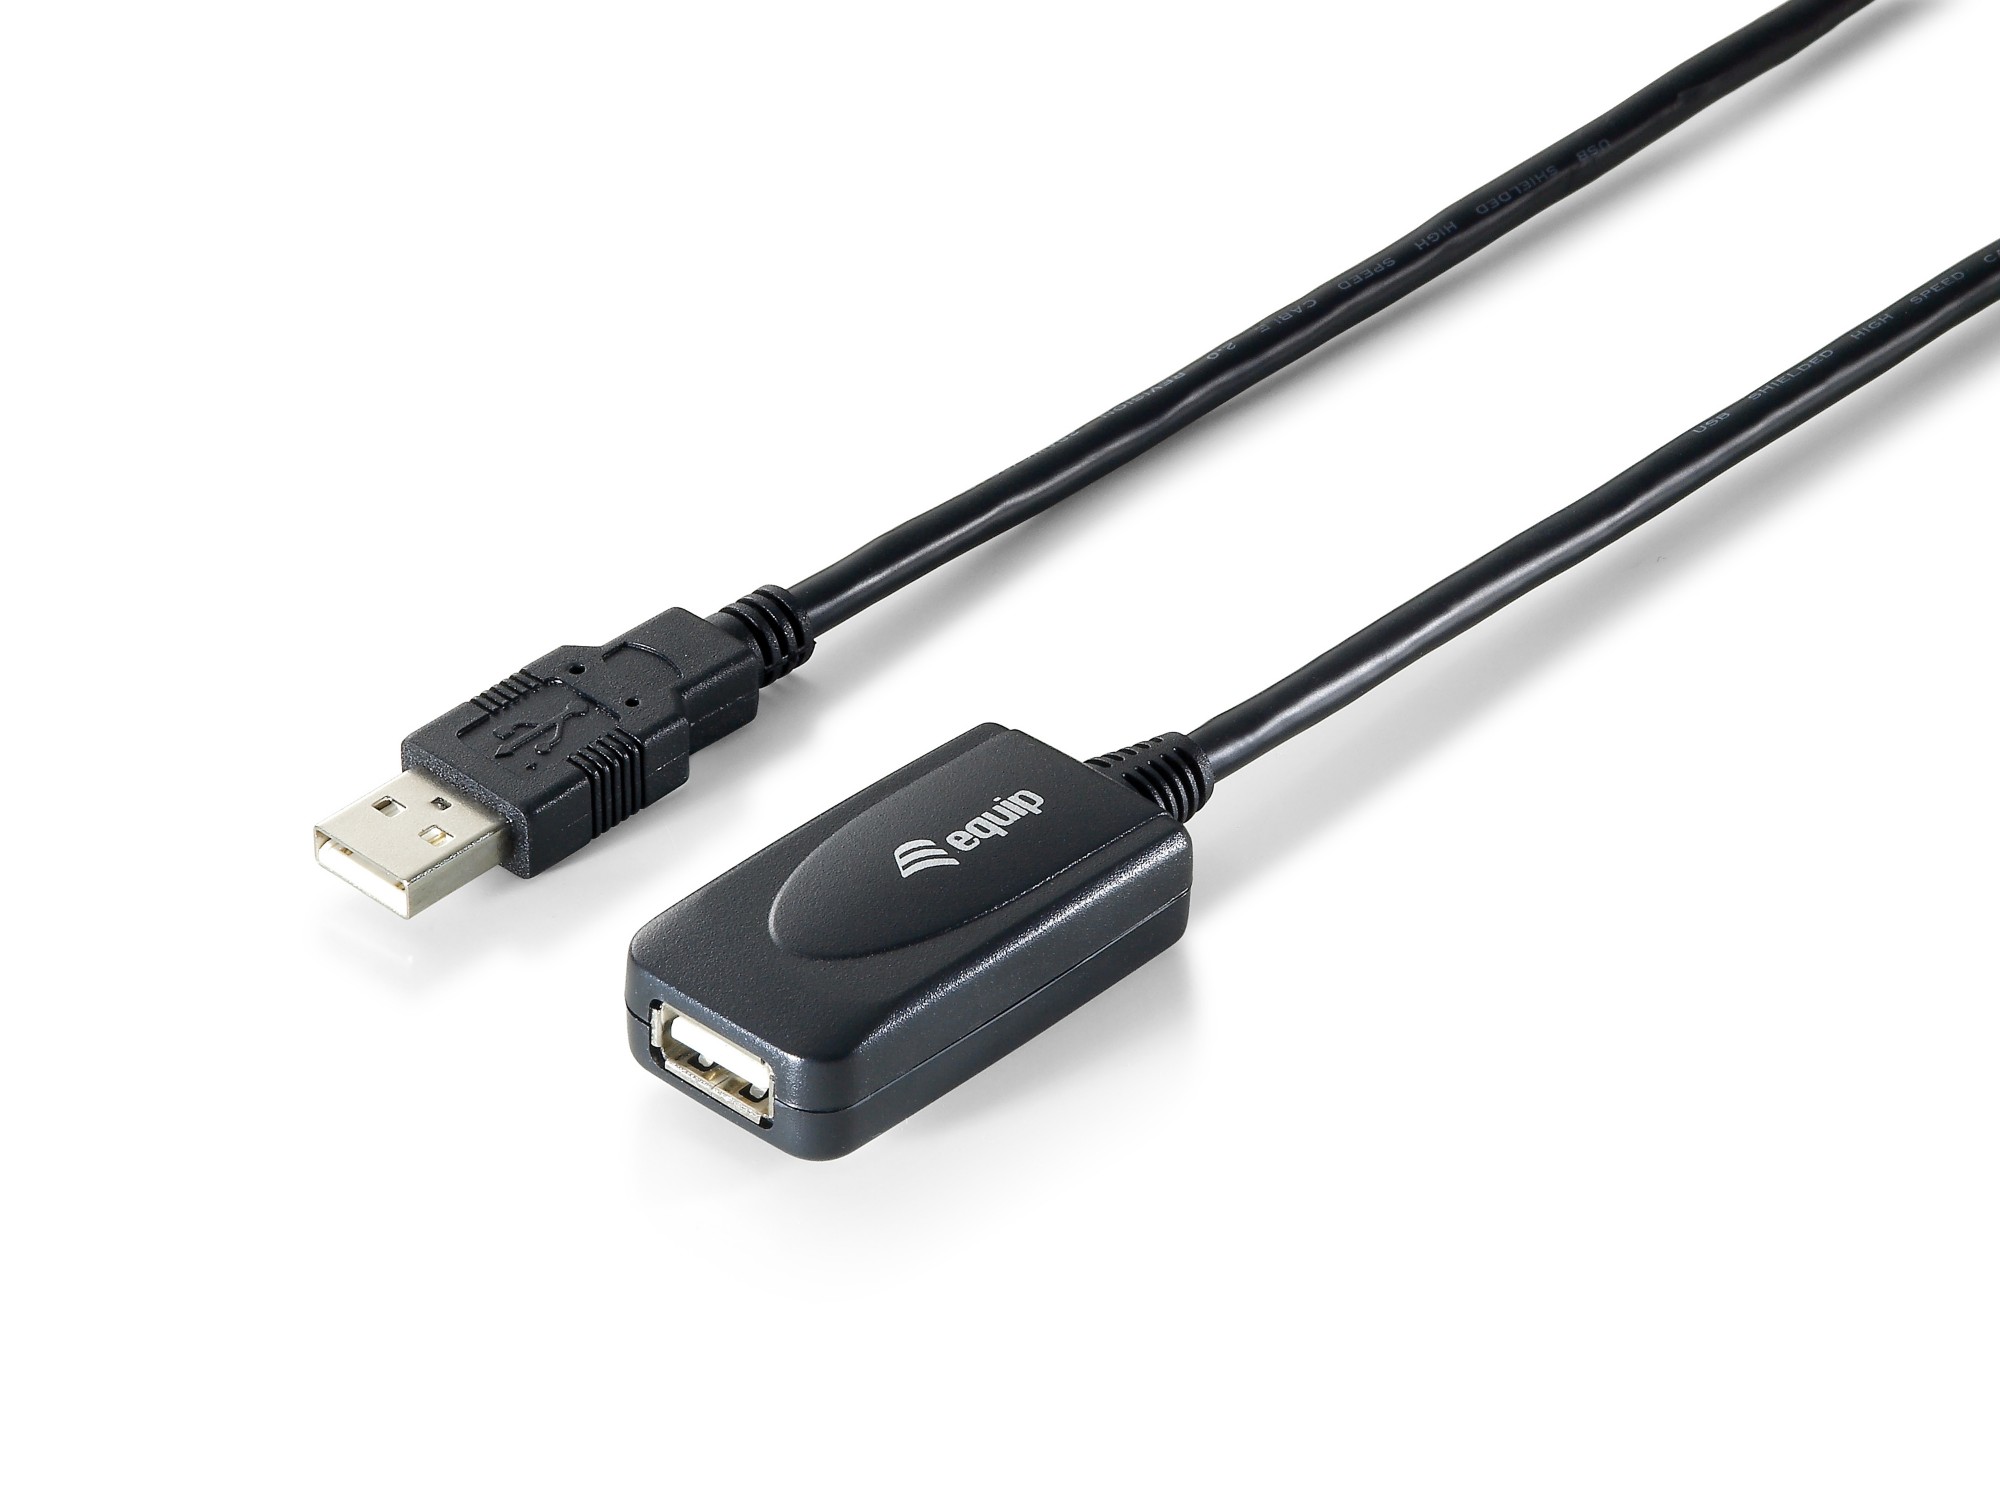 Photos - Cable (video, audio, USB) Equip USB 2.0 Type A Active Extension Cable Male to Female, 15m 133311 